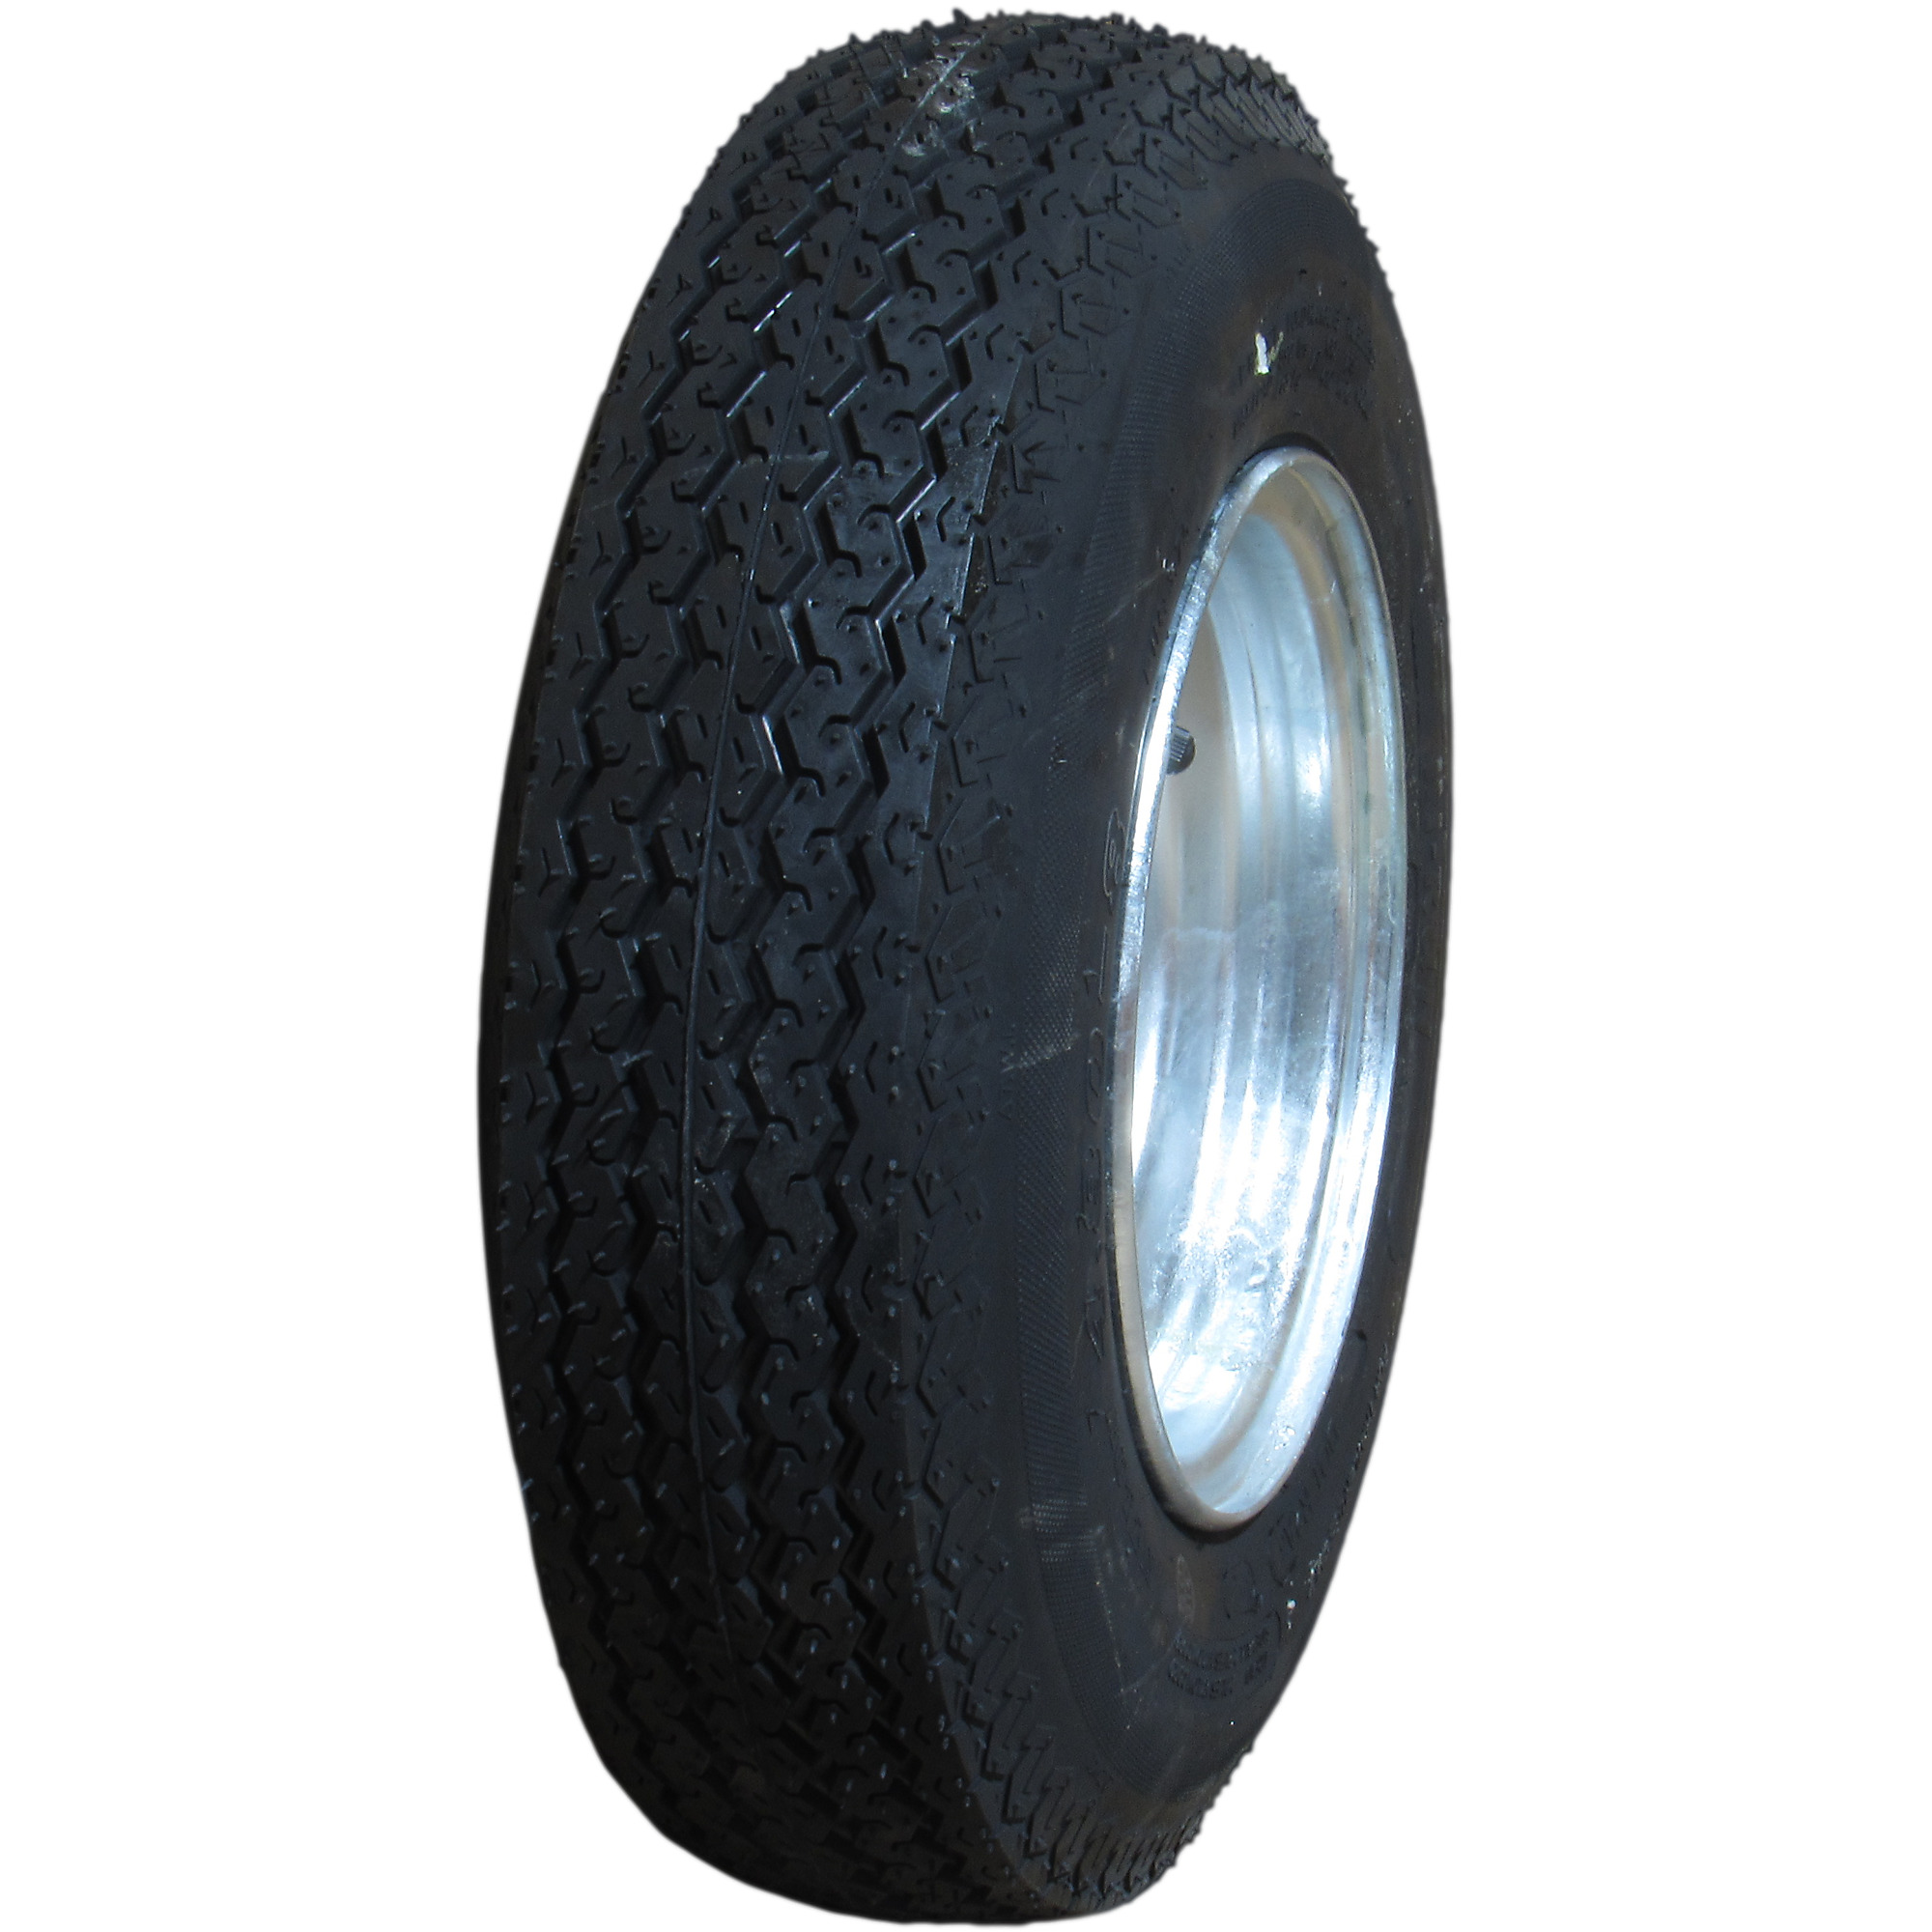 HI-RUN, Highway Trailer Tire Assembly, Galvanized, Tire Size 4.80-12 Load Range Rating B, Bolt Holes (qty.) 4 Model ASB1057